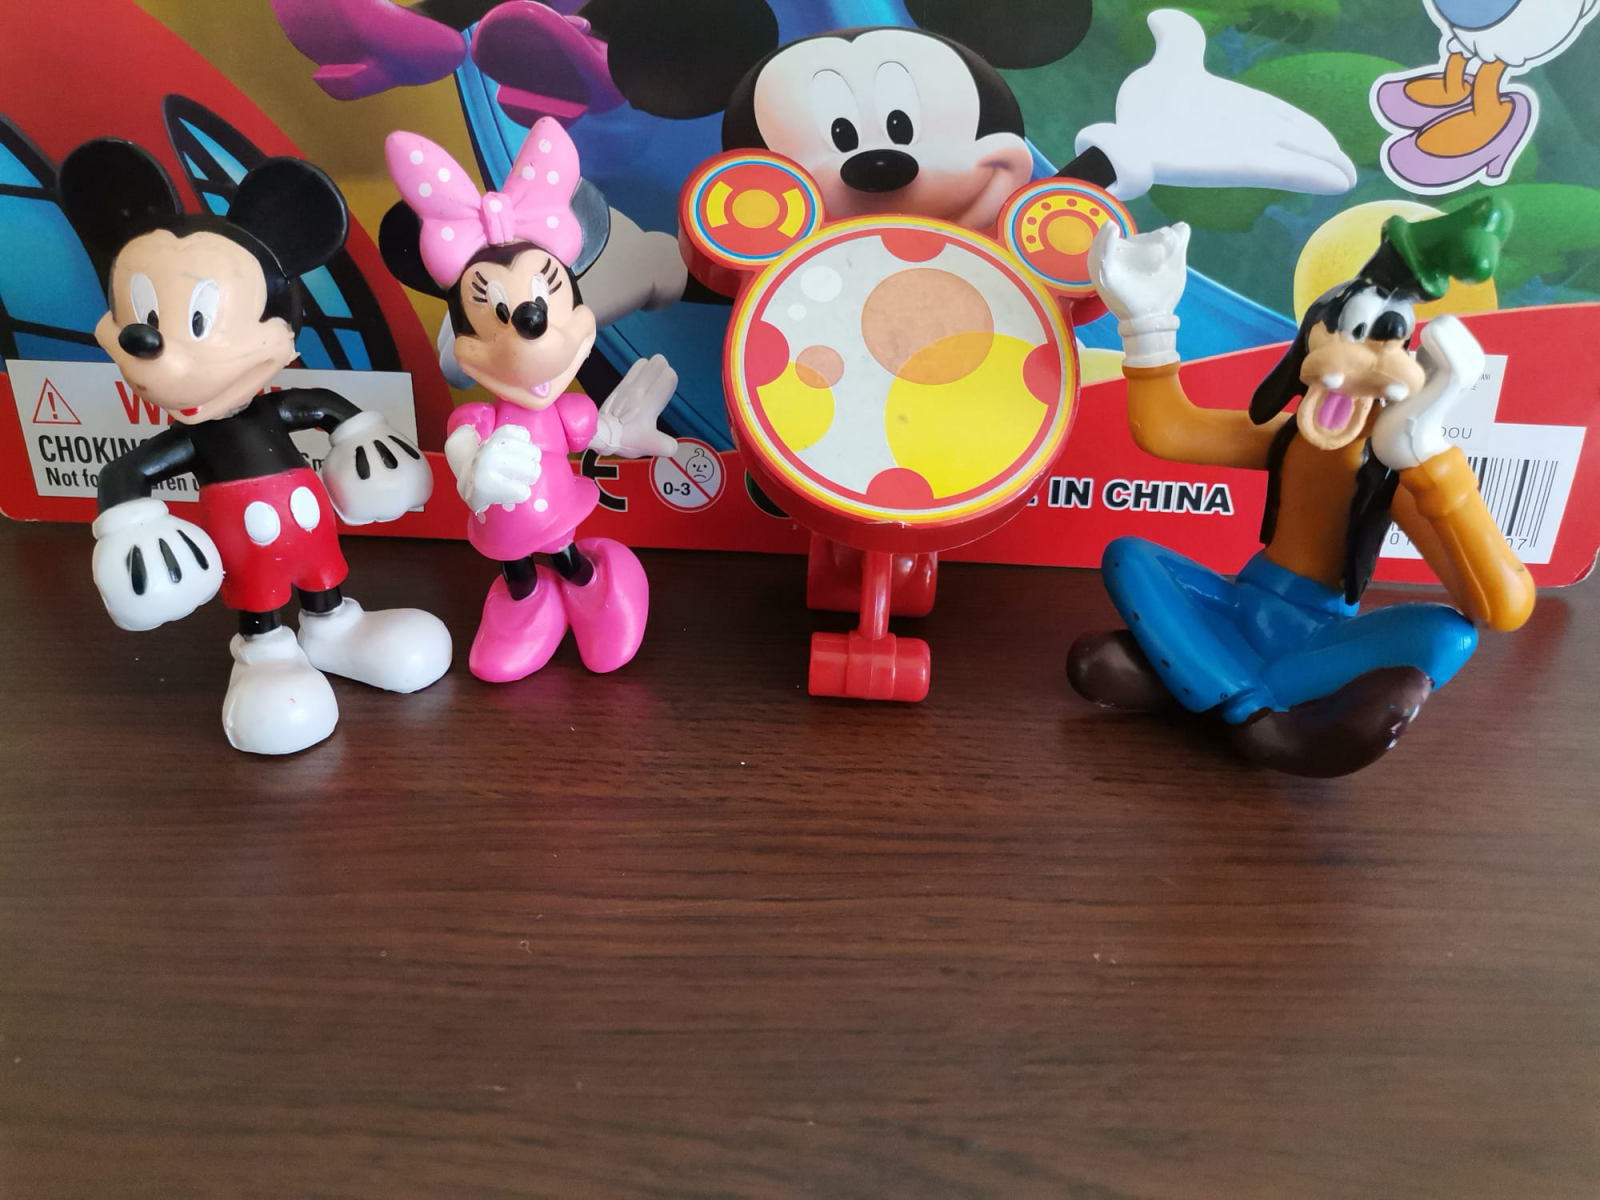 according to Limestone hurt Set 3 Figurine ClubHouse Mickey Mouse, Minnie Mouse, Goofy si Toodles